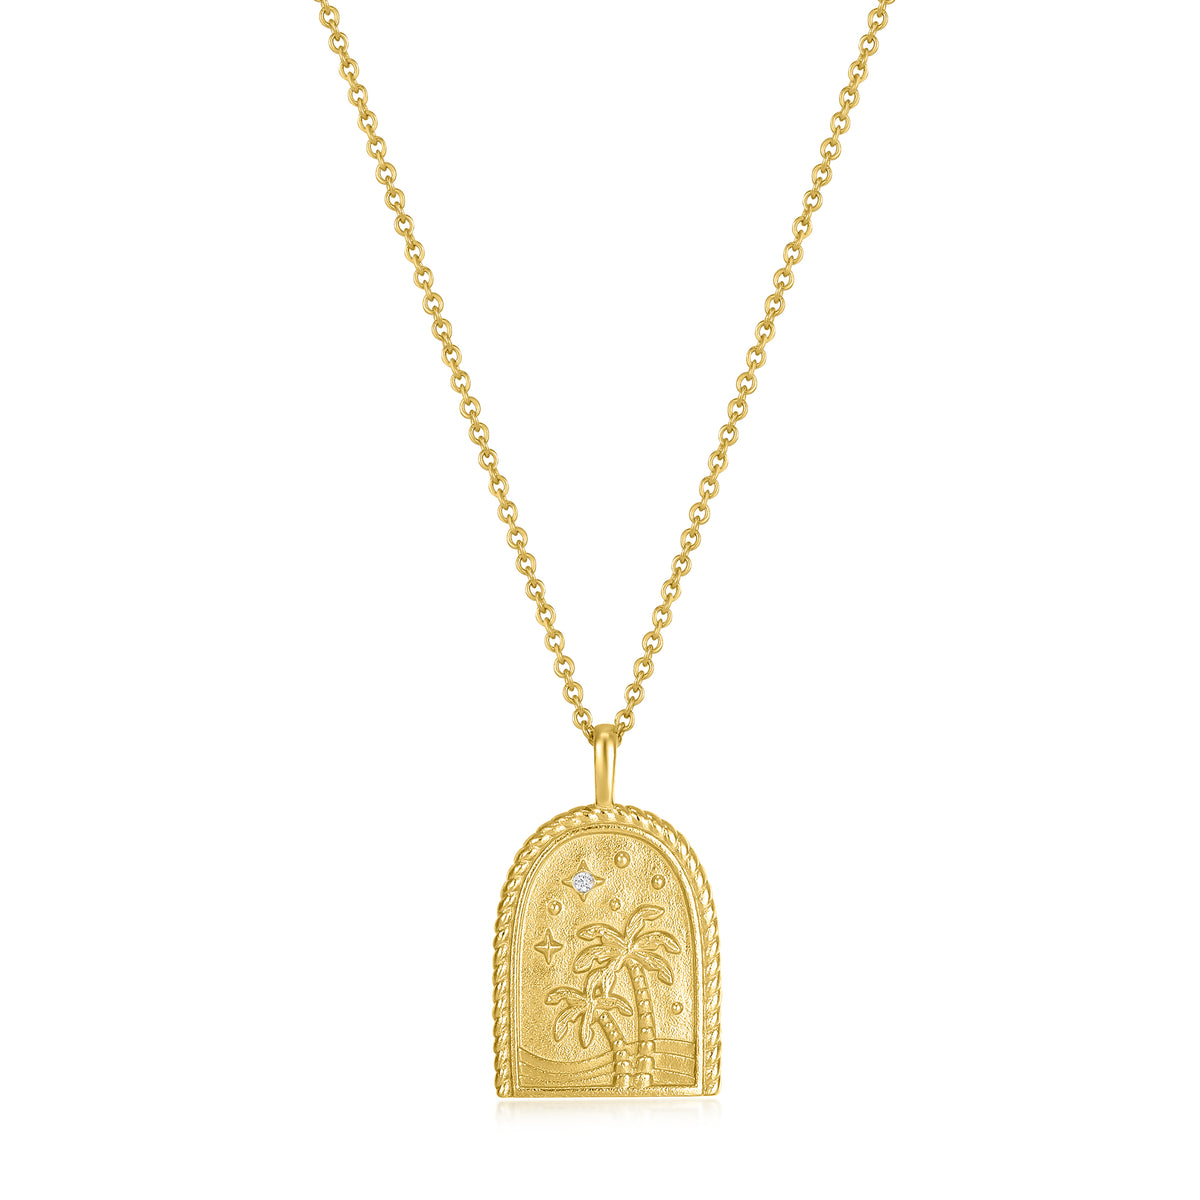 Levana | Hera Necklace | White CZ | 925 Silver | 14K Gold Plated